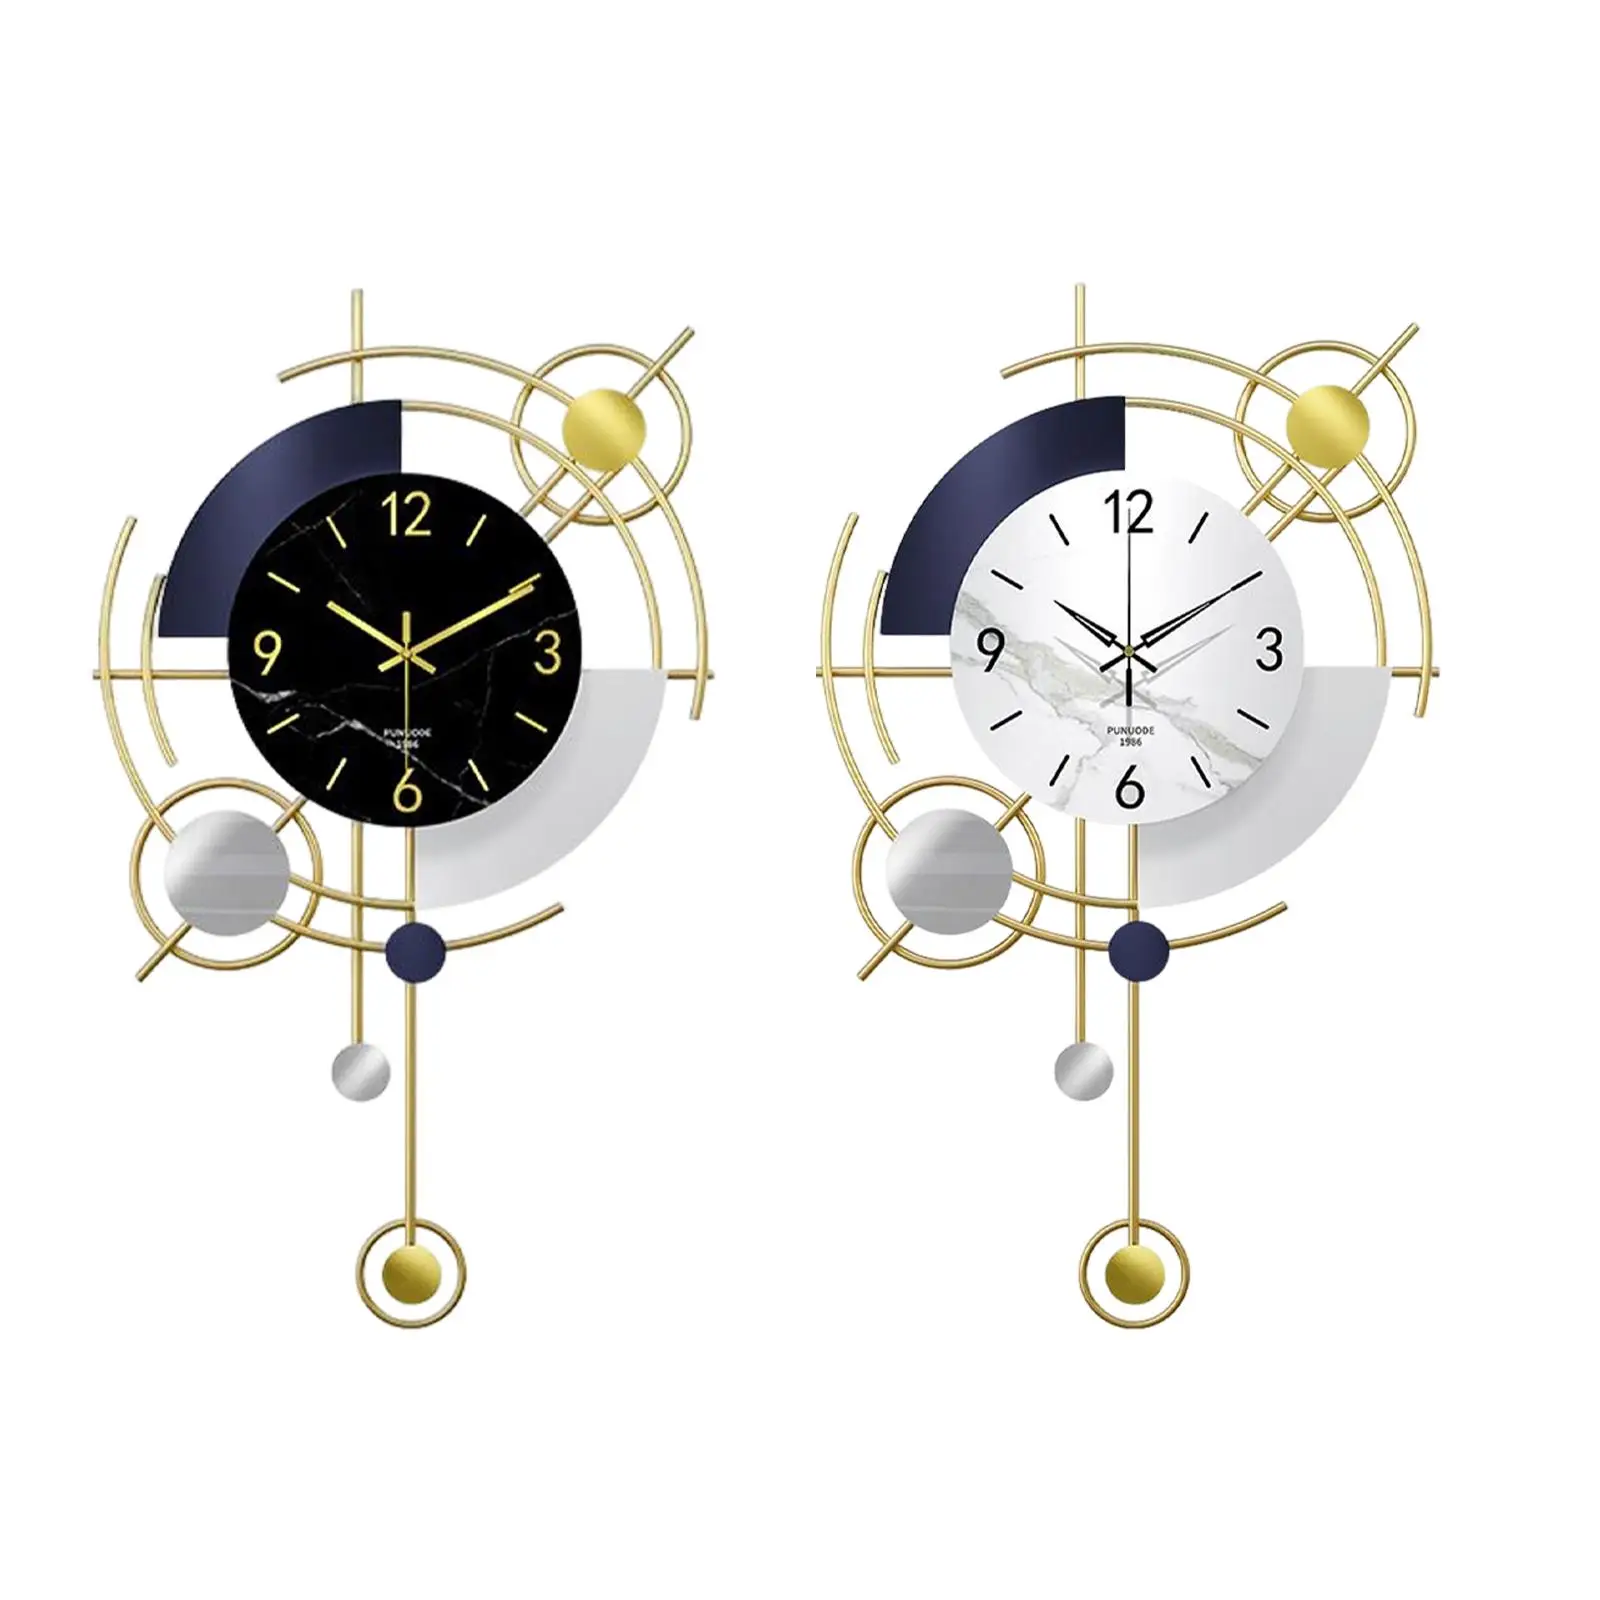 Modern Wall Clock Retro Style Hanging Mute Battery Operated No Ticking Metal for Home Office Bedroom Kitchen Decoration